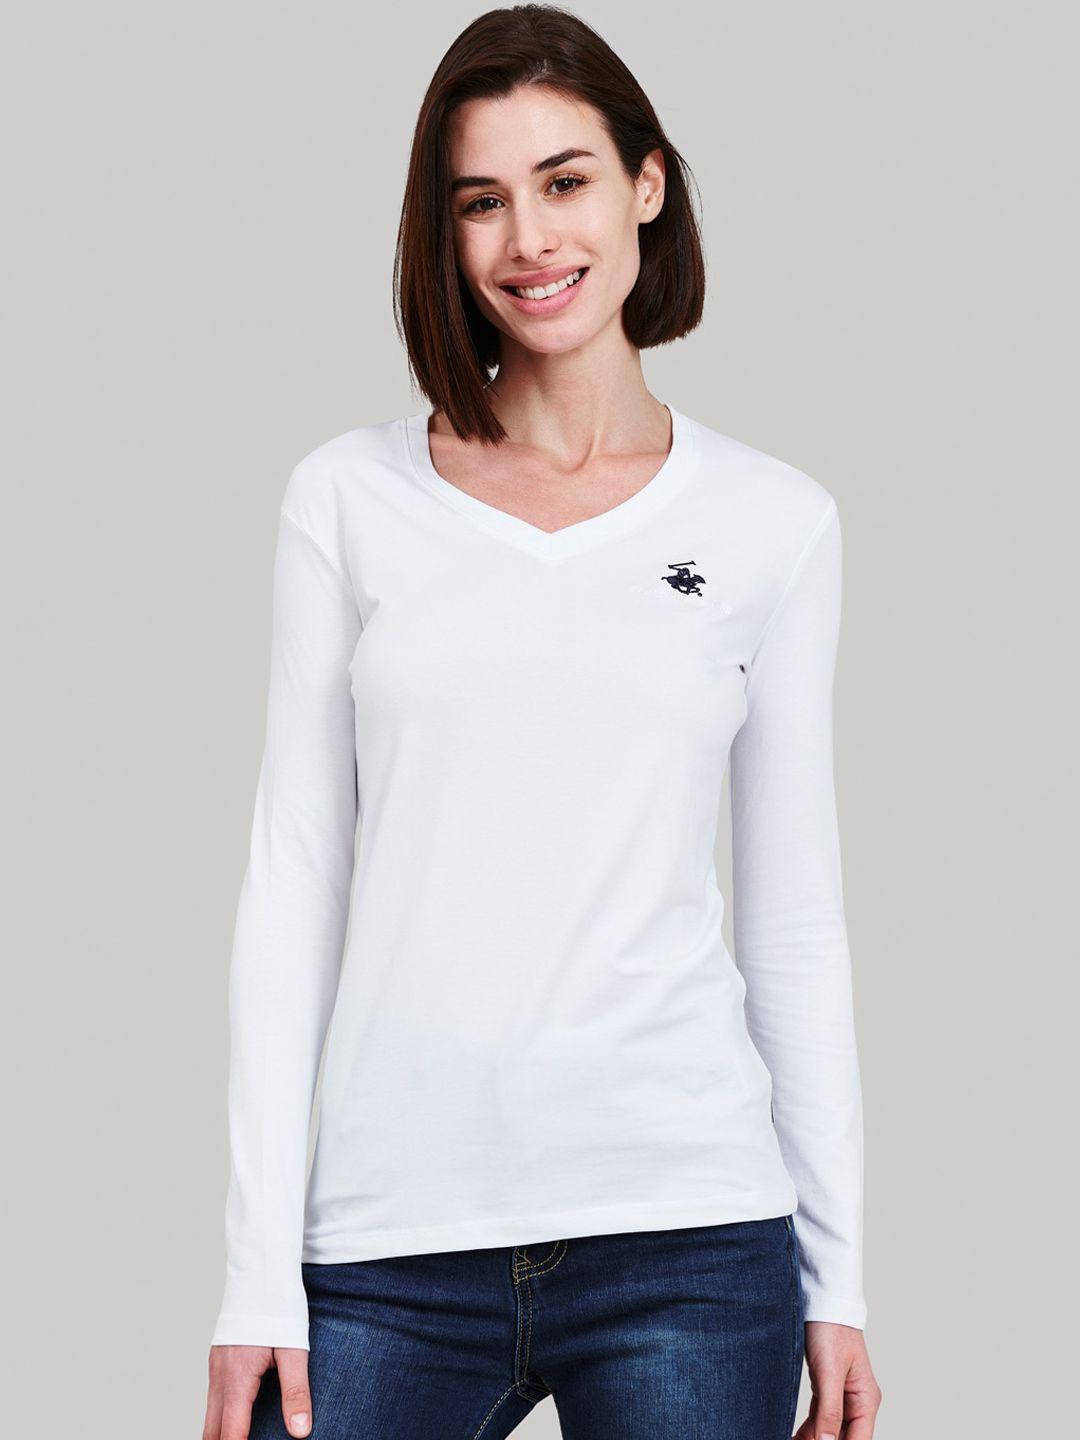 beverly hills polo club women white solid v-neck t-shirt